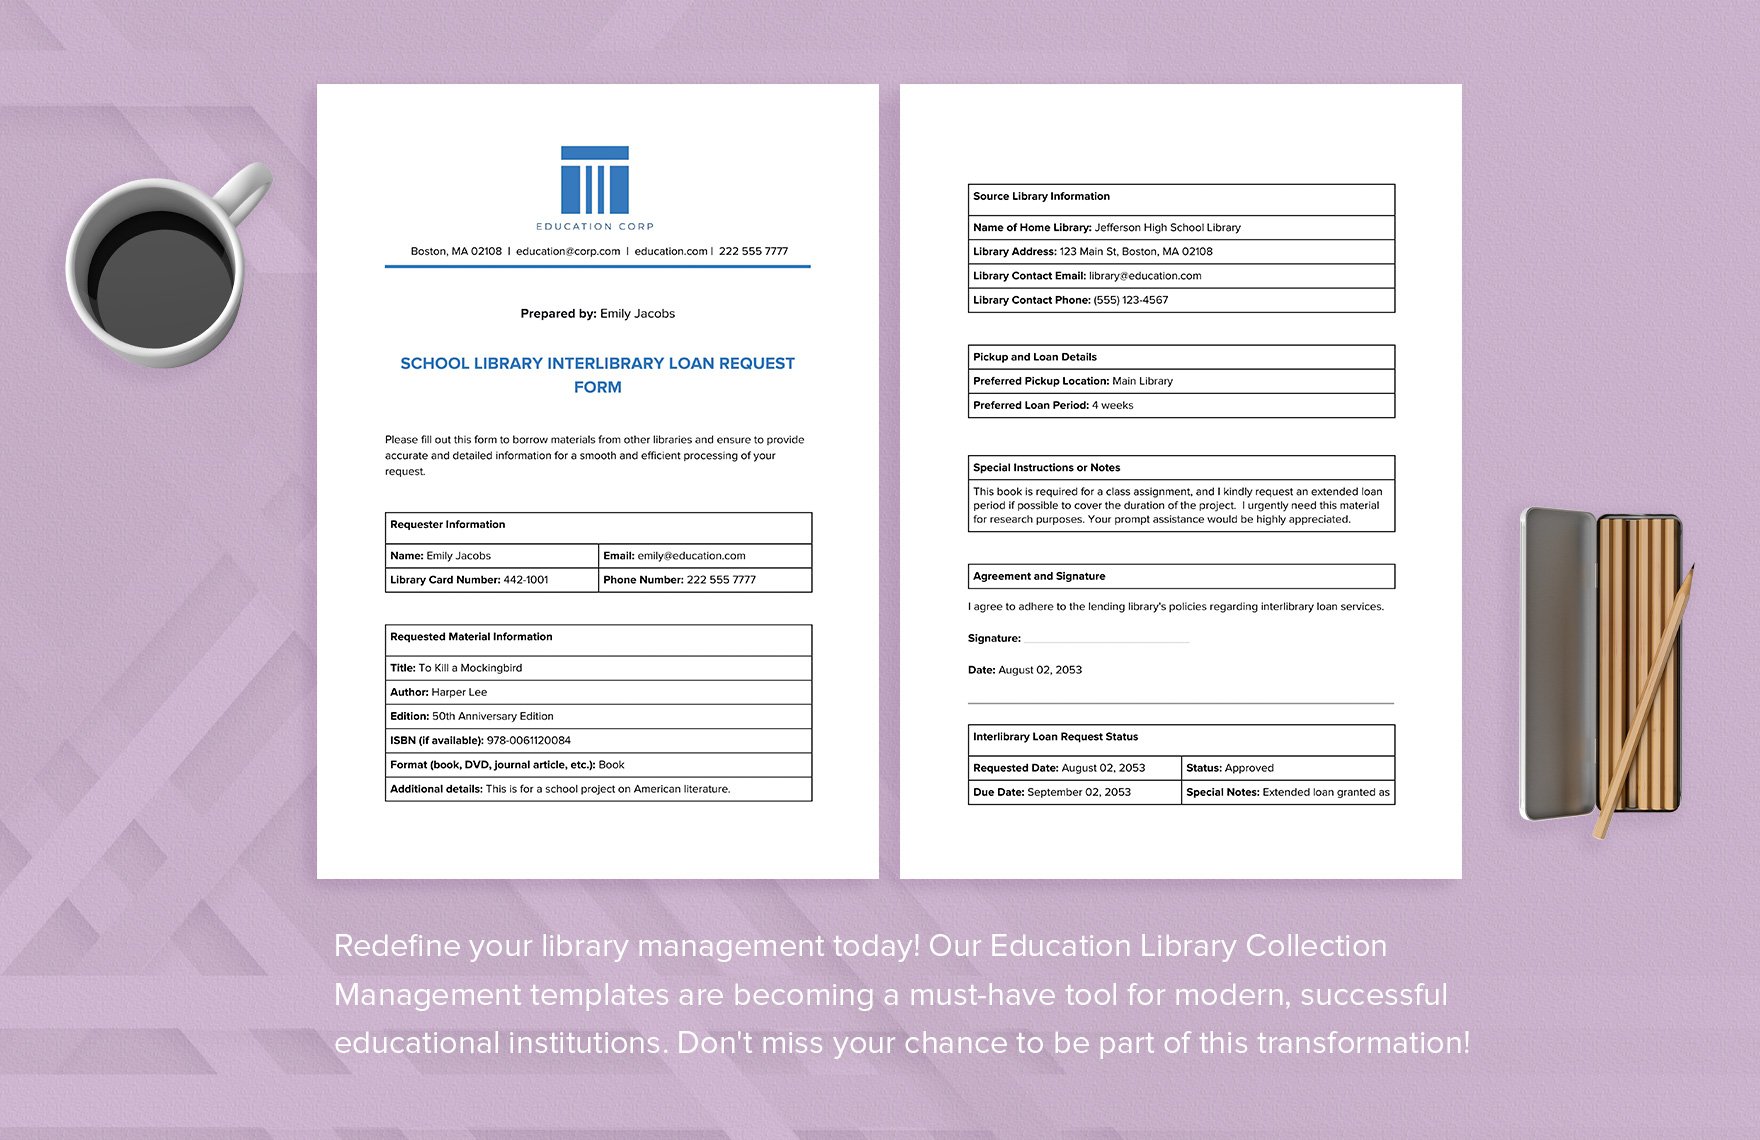 School Library Interlibrary Loan Request Form Template